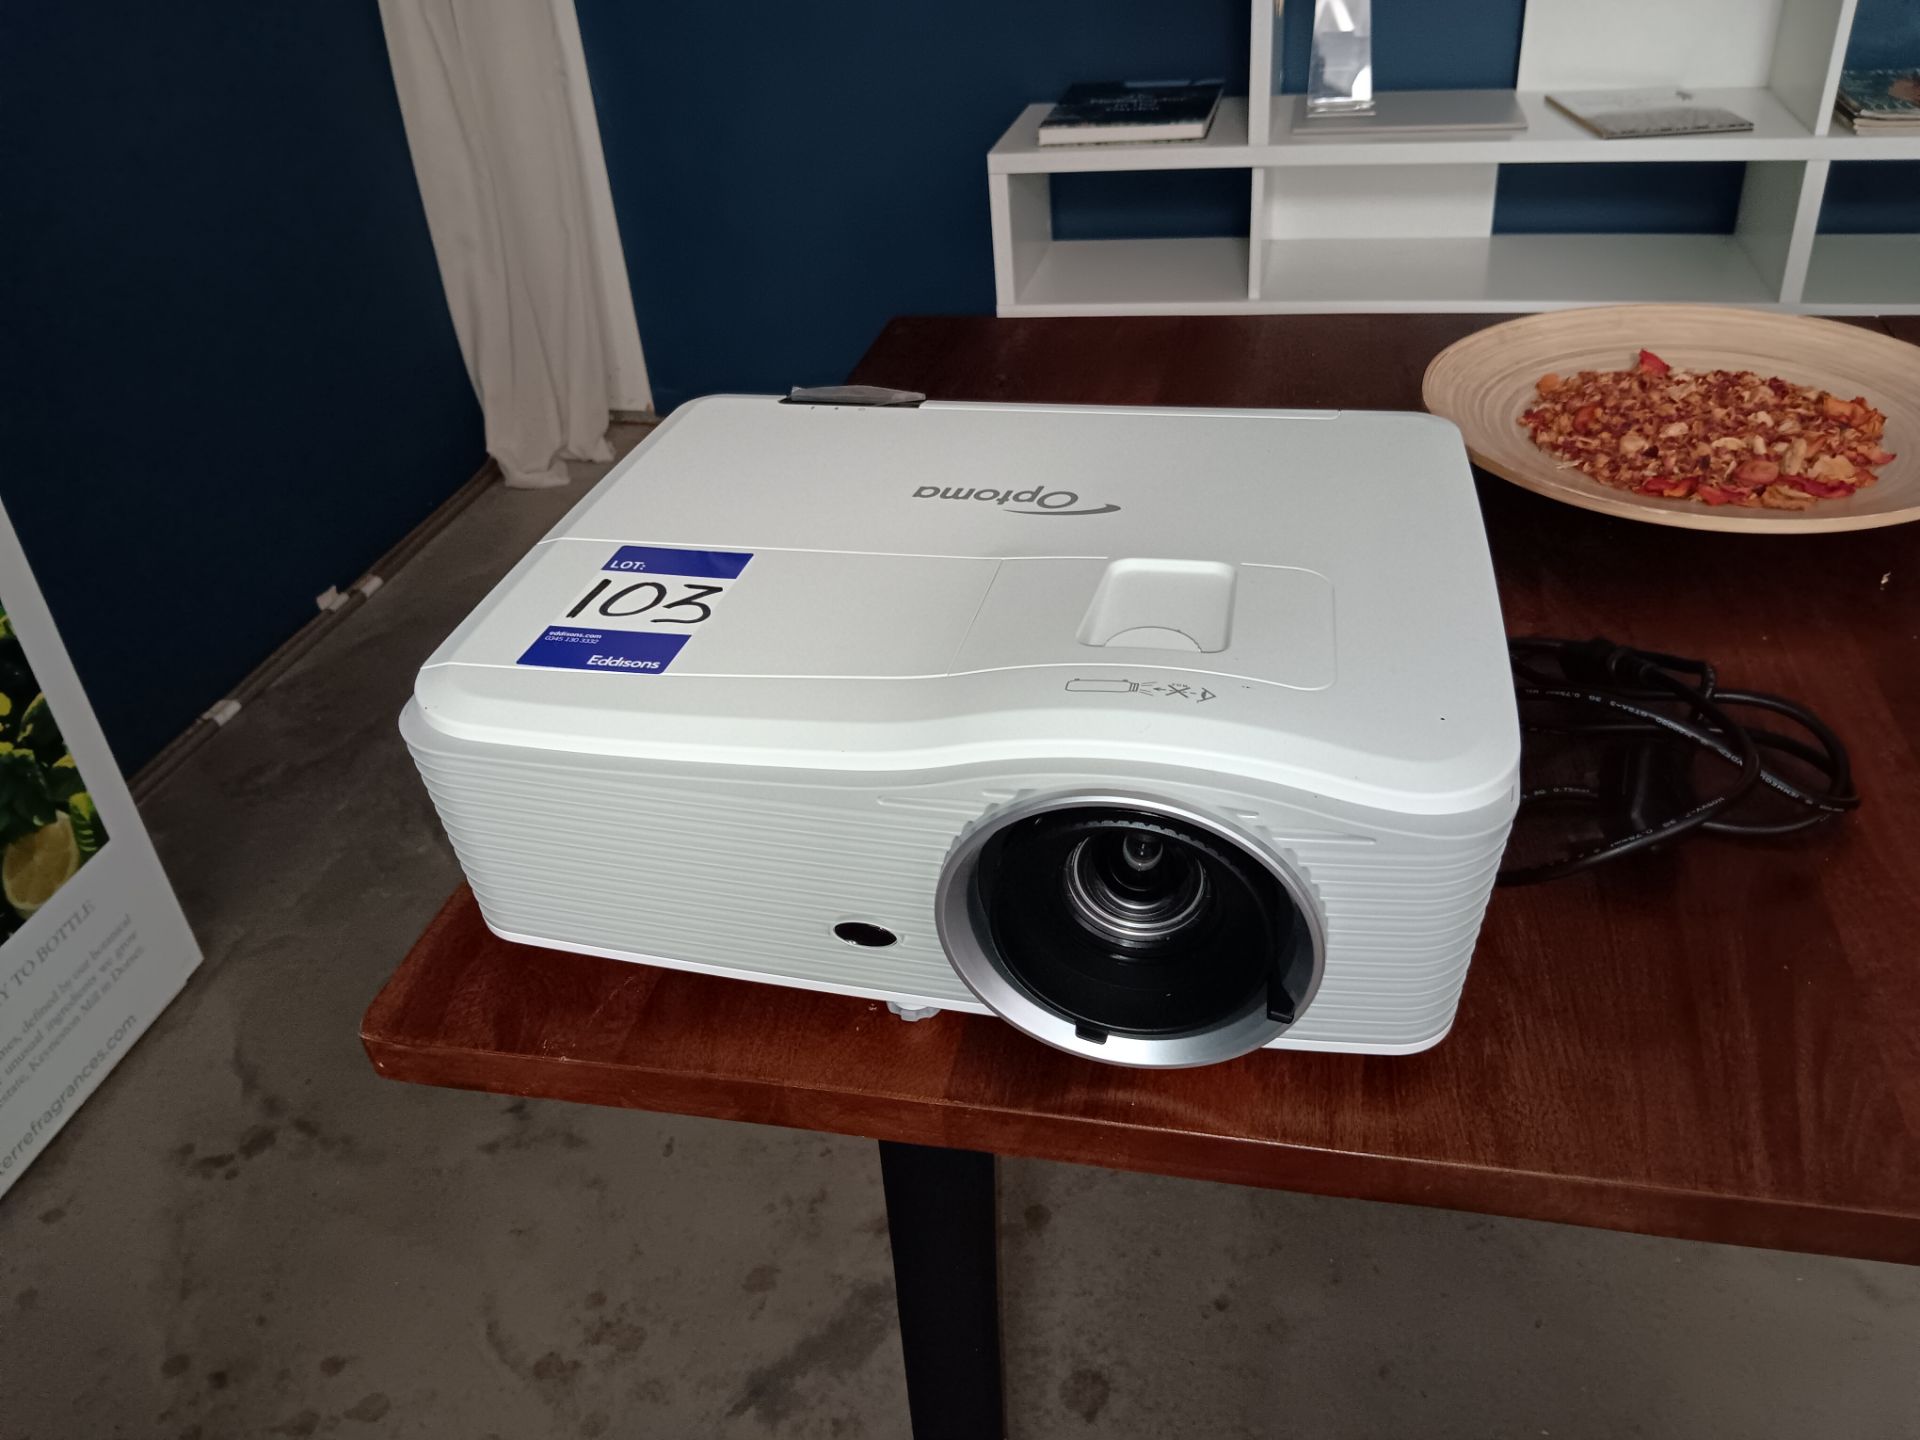 Optoma DLP LCD Projector